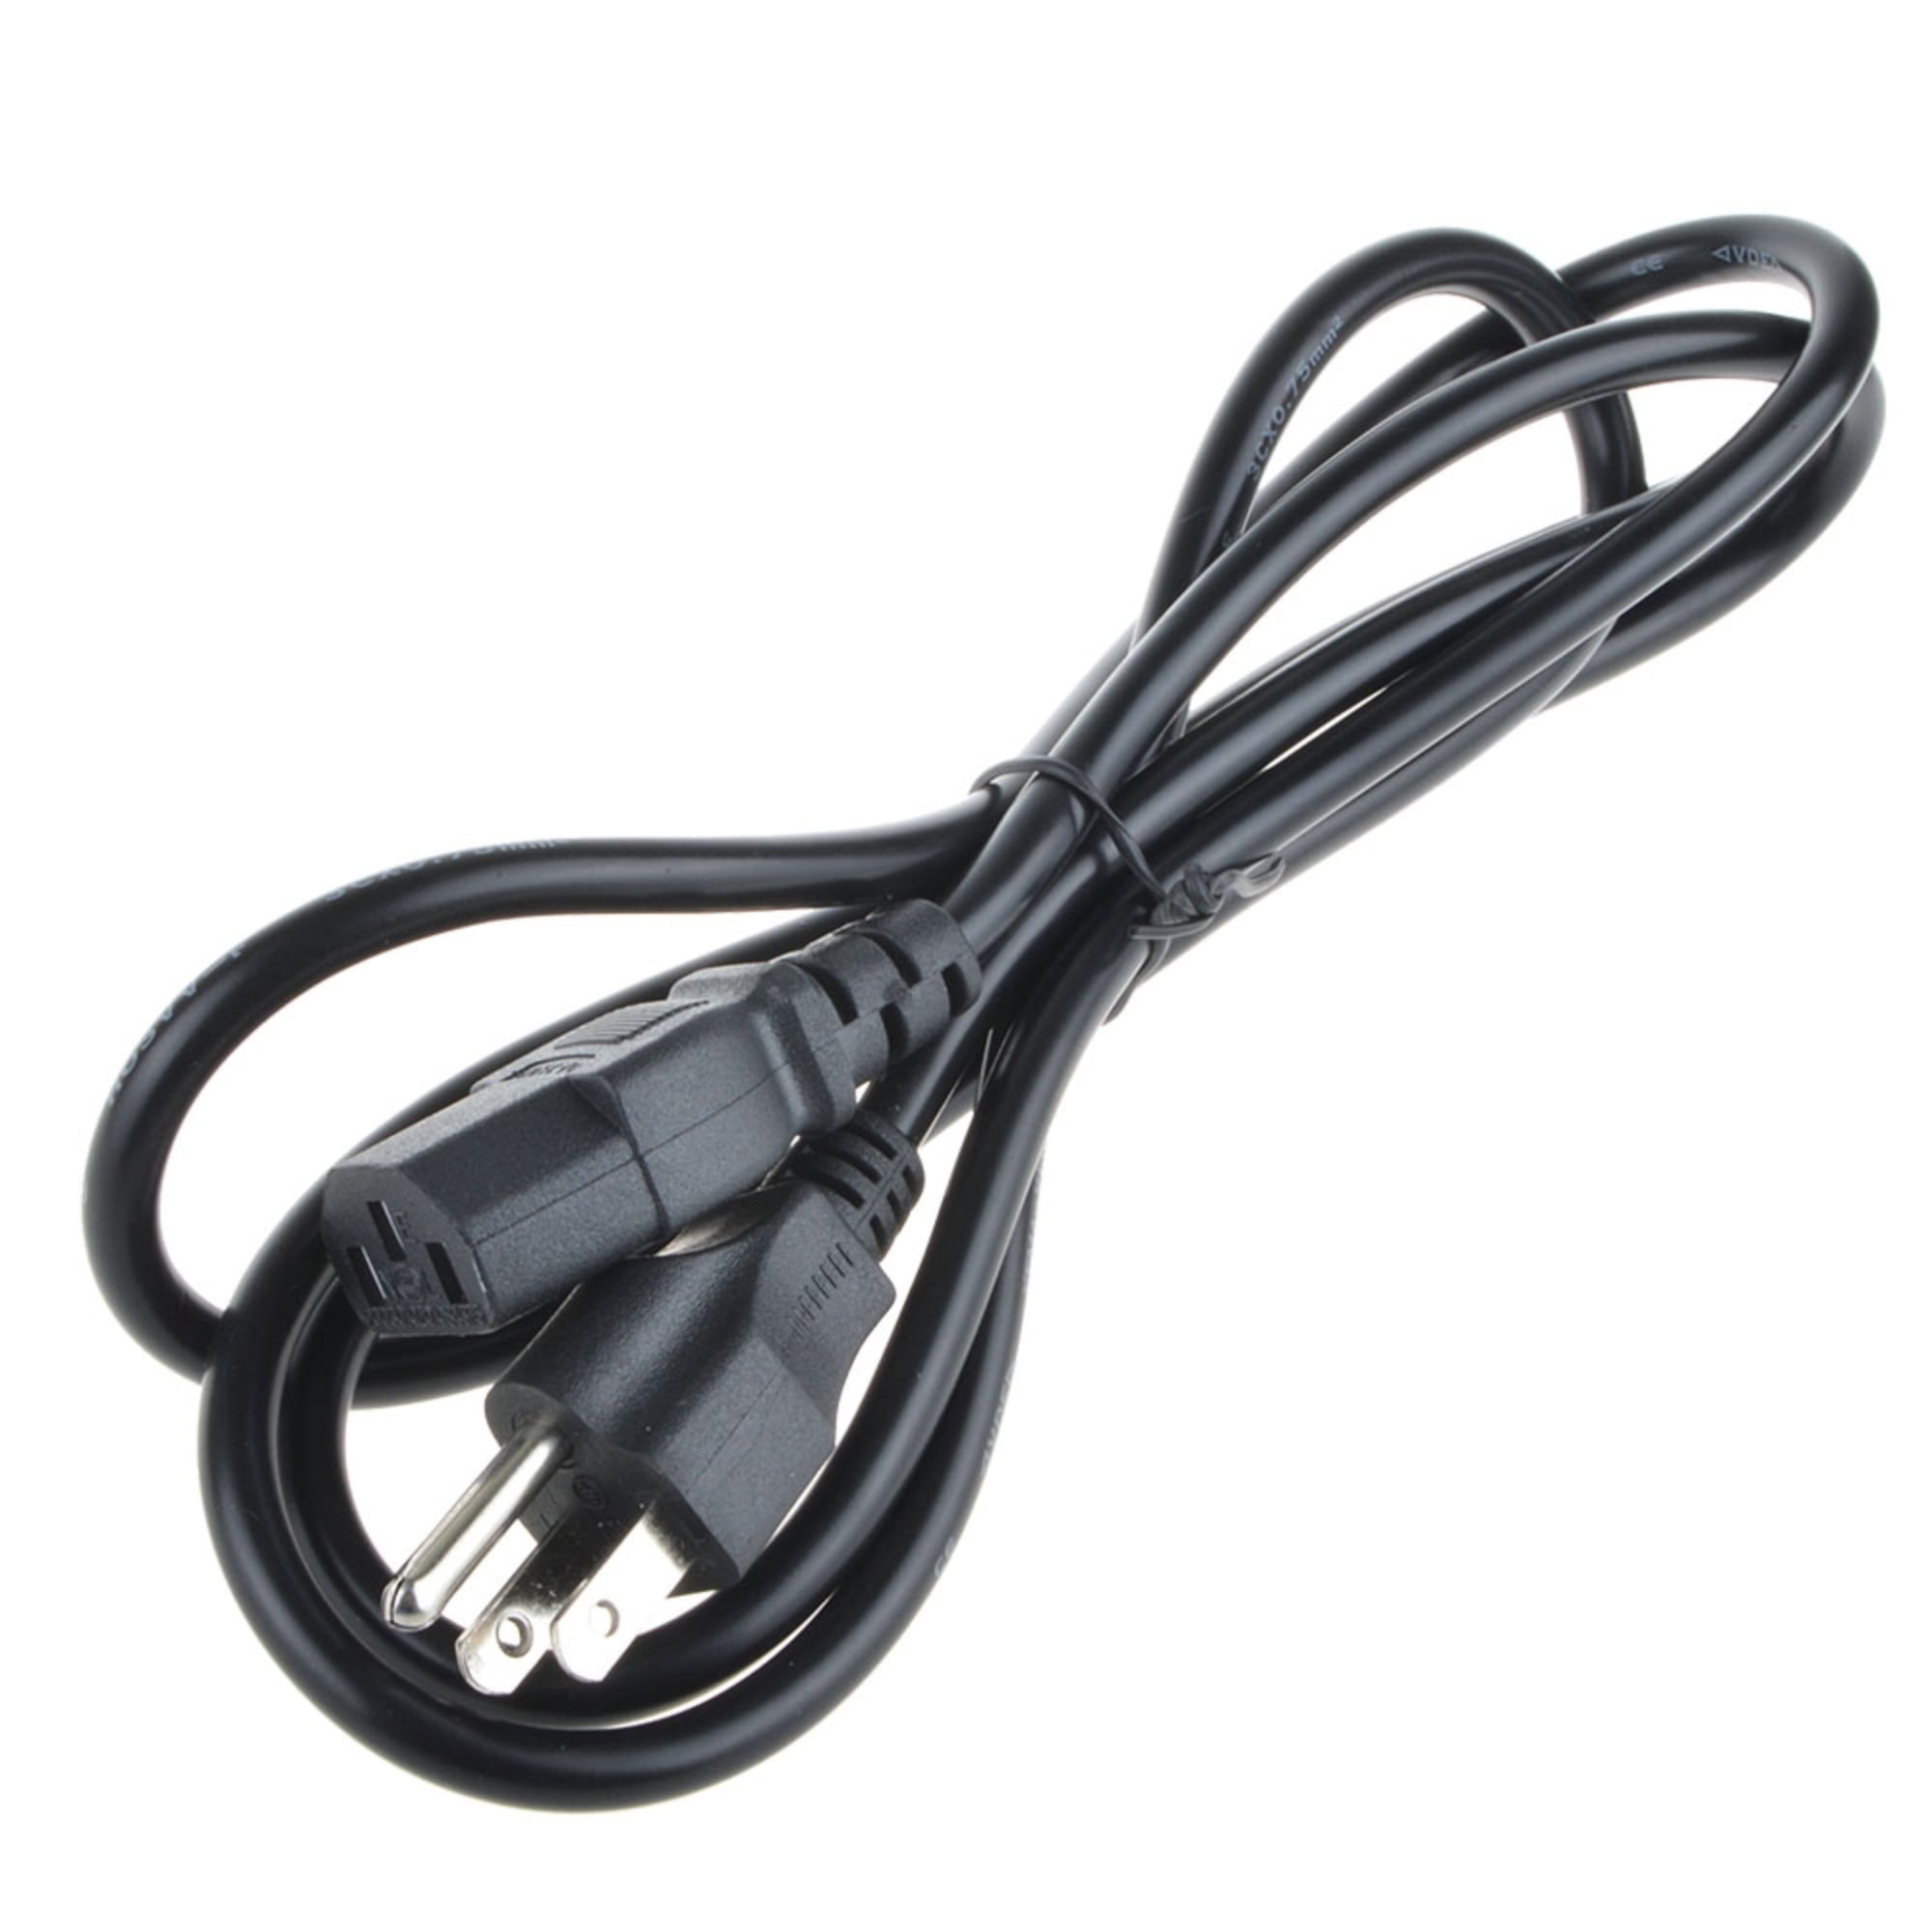 Pkpower 6ft AC Power Cord Cable for Numark Mp103usb CD Player Sharp TV 2-Prong Lead, Black